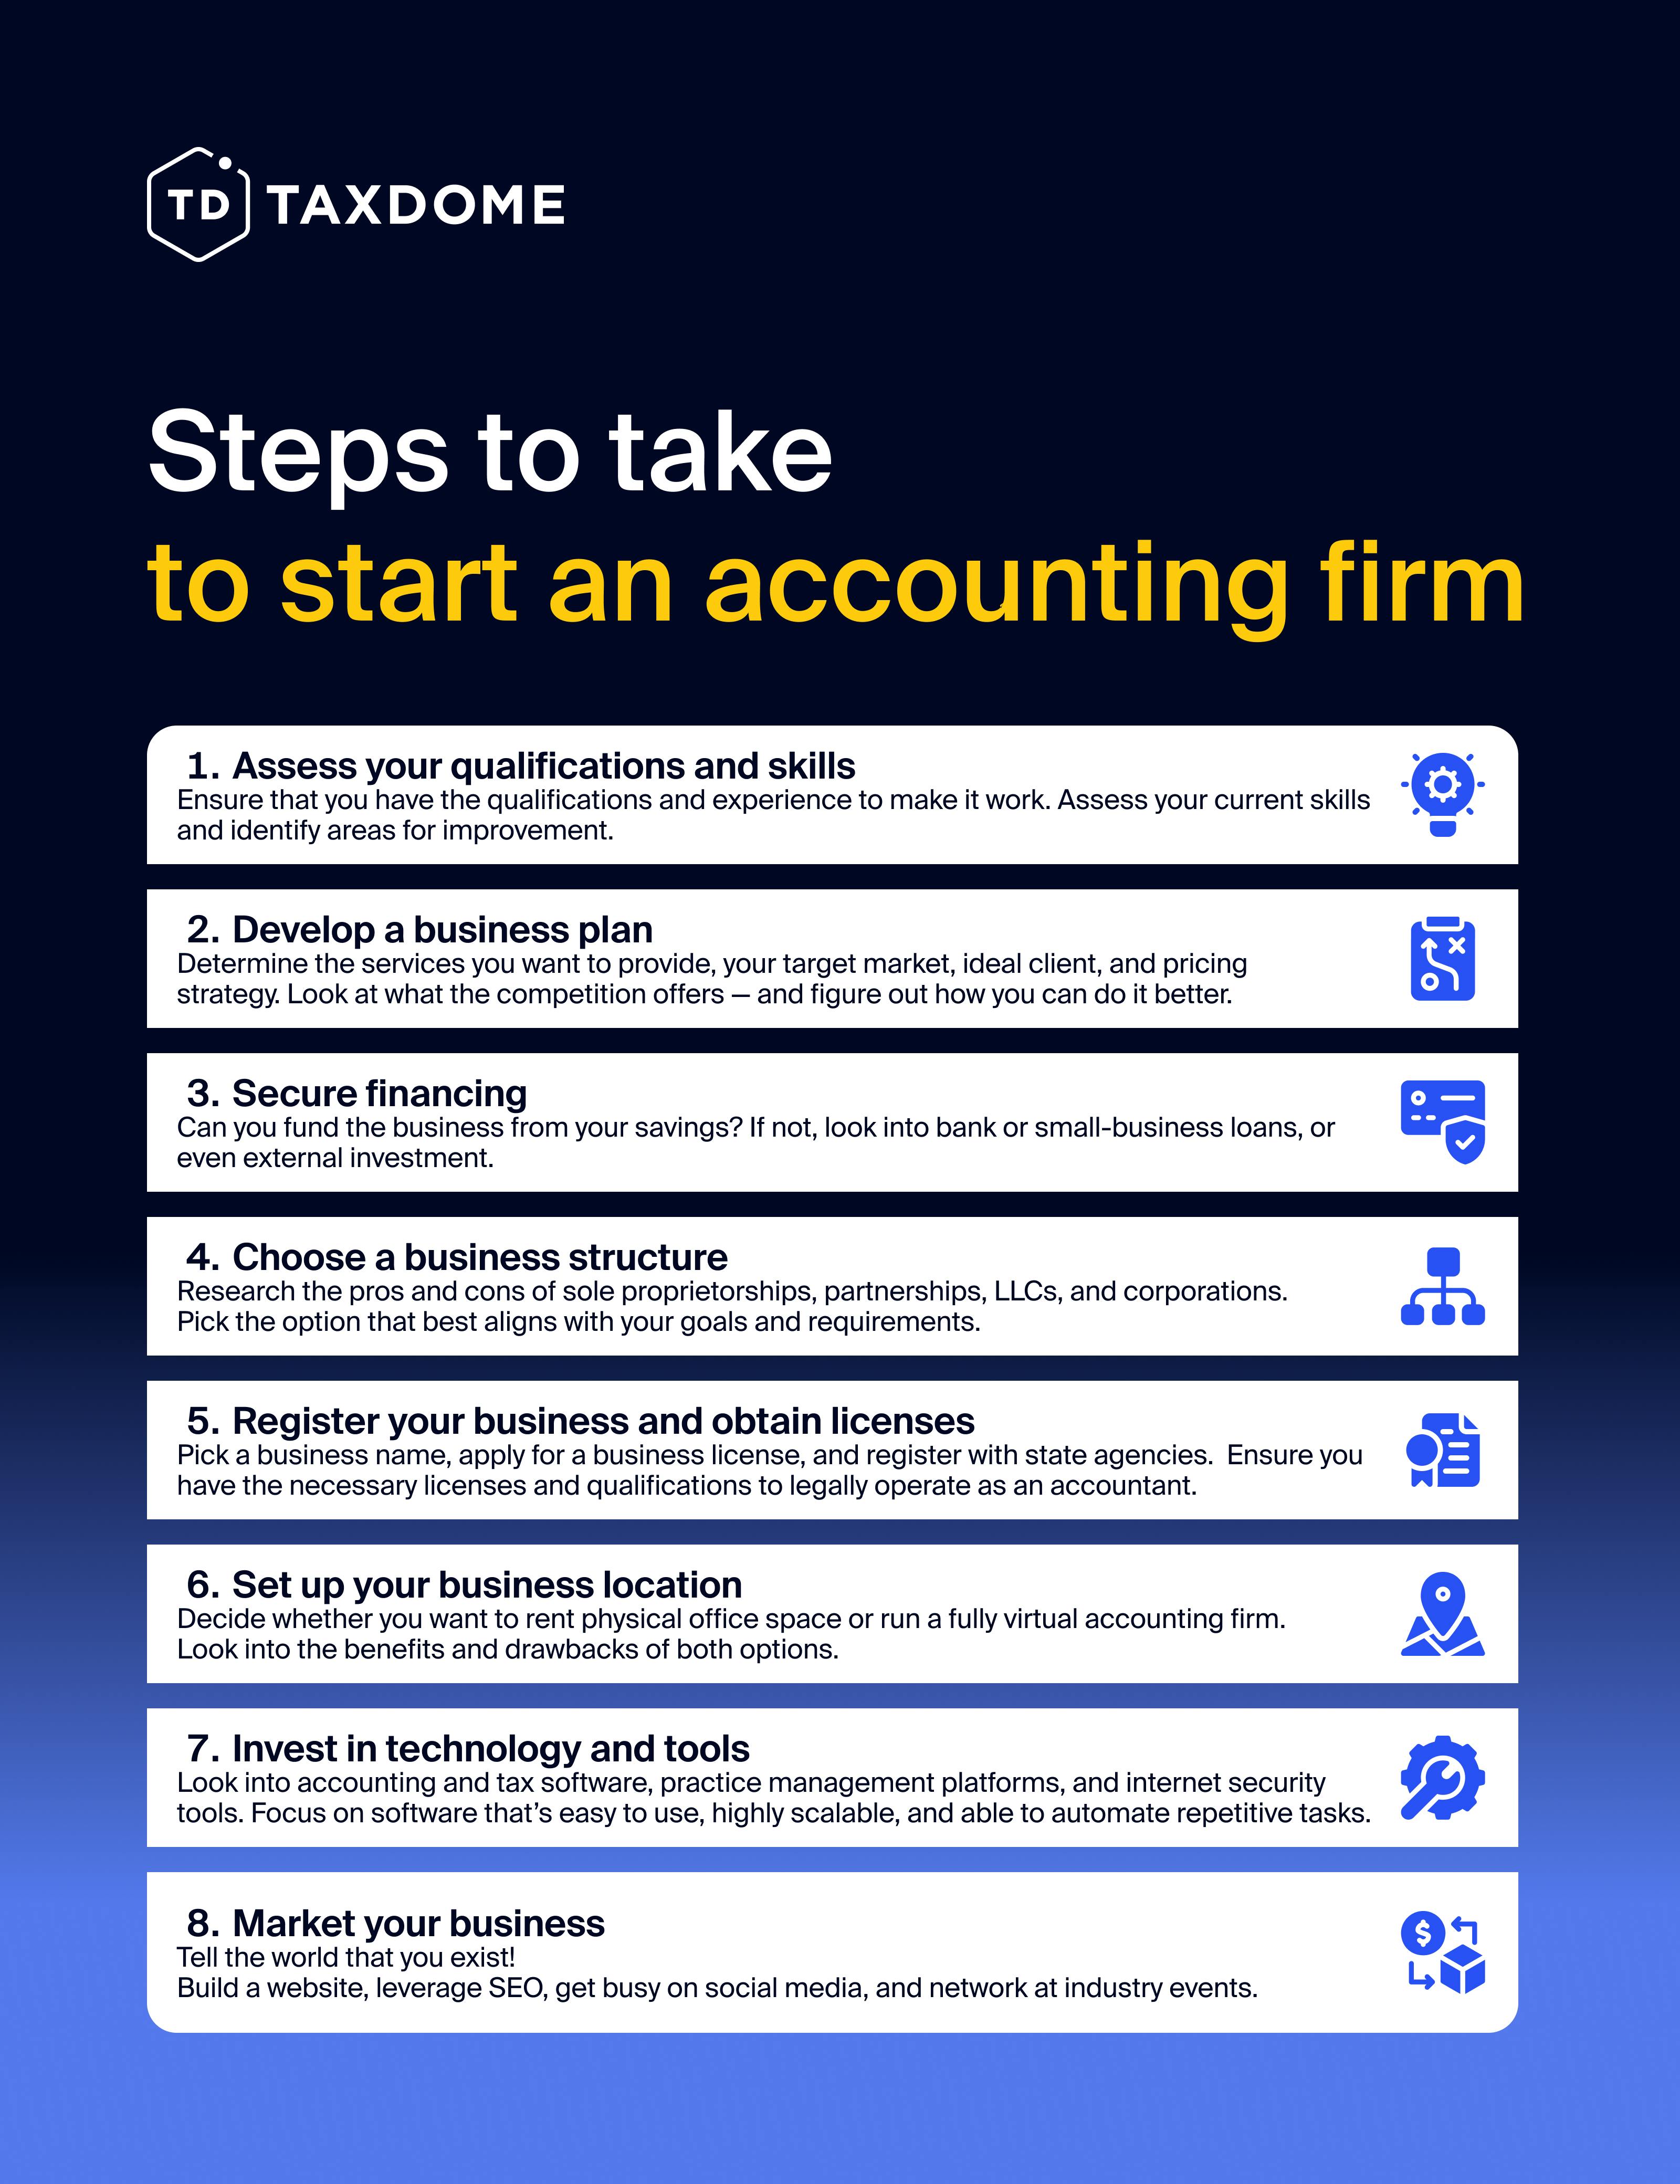 An infographic showing the steps you can take to start an accounting firm.